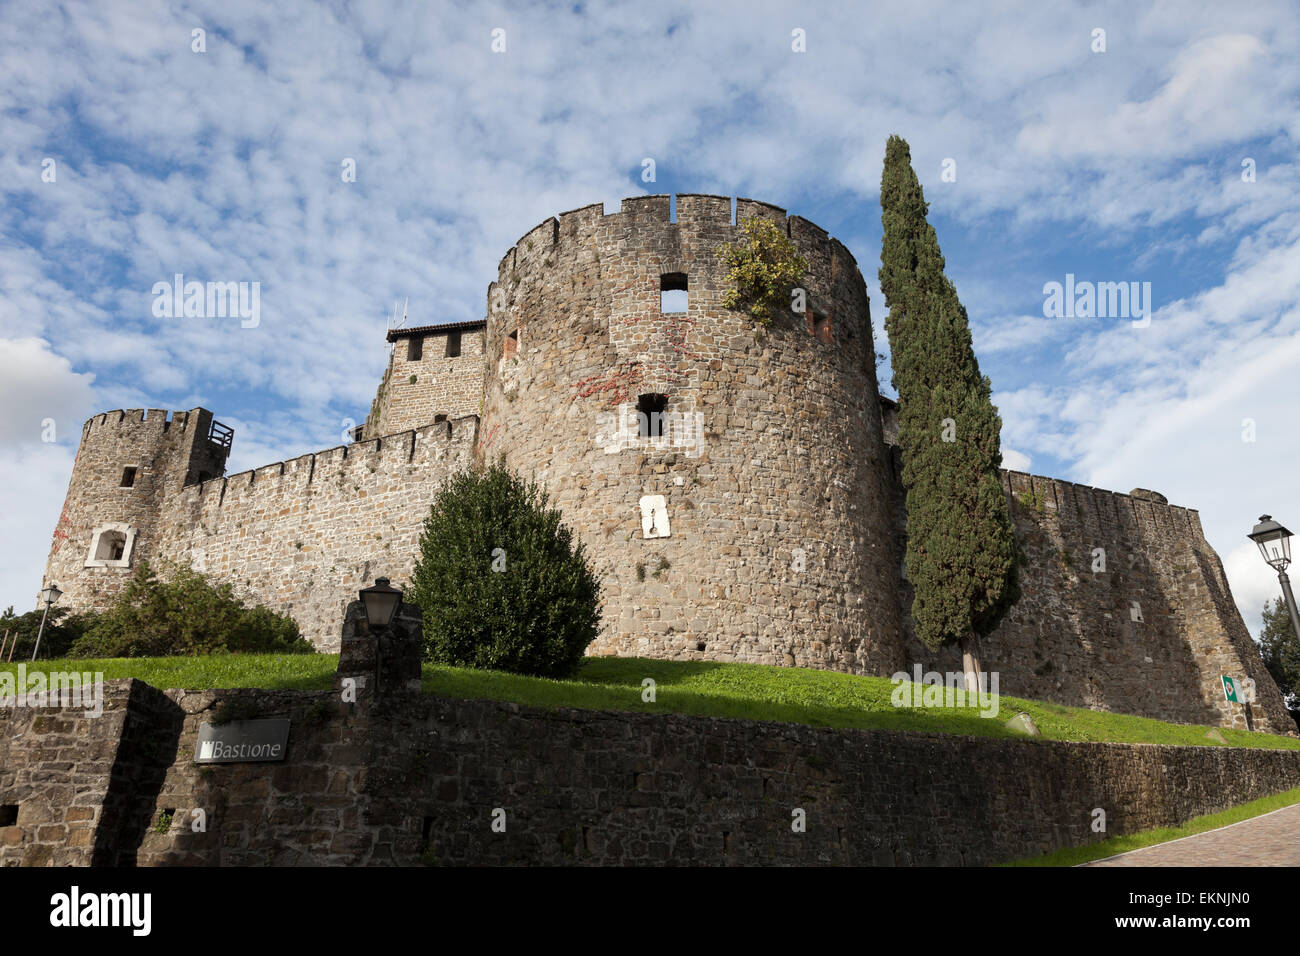 Castle of Gorizia and clouds Stock Photo